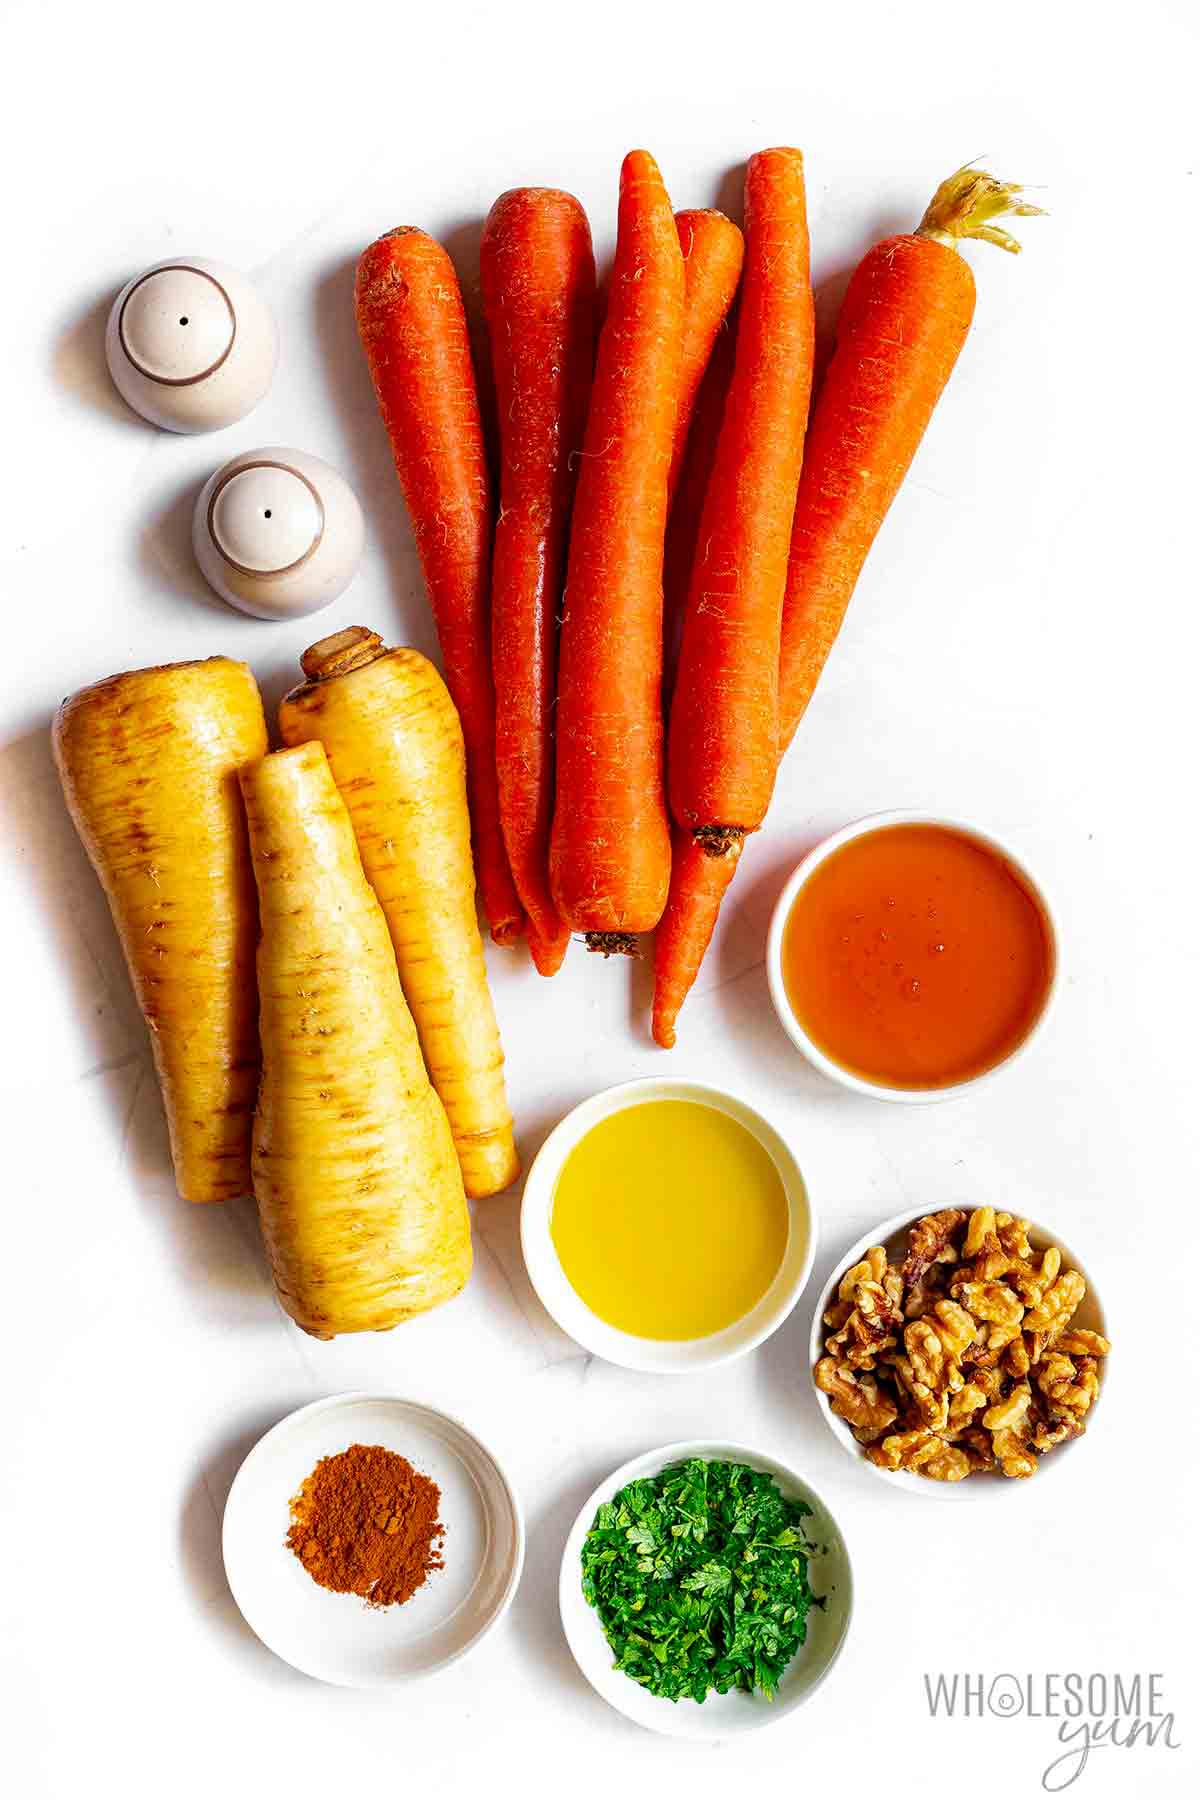 Ingredients for roasted parsnips and carrots.